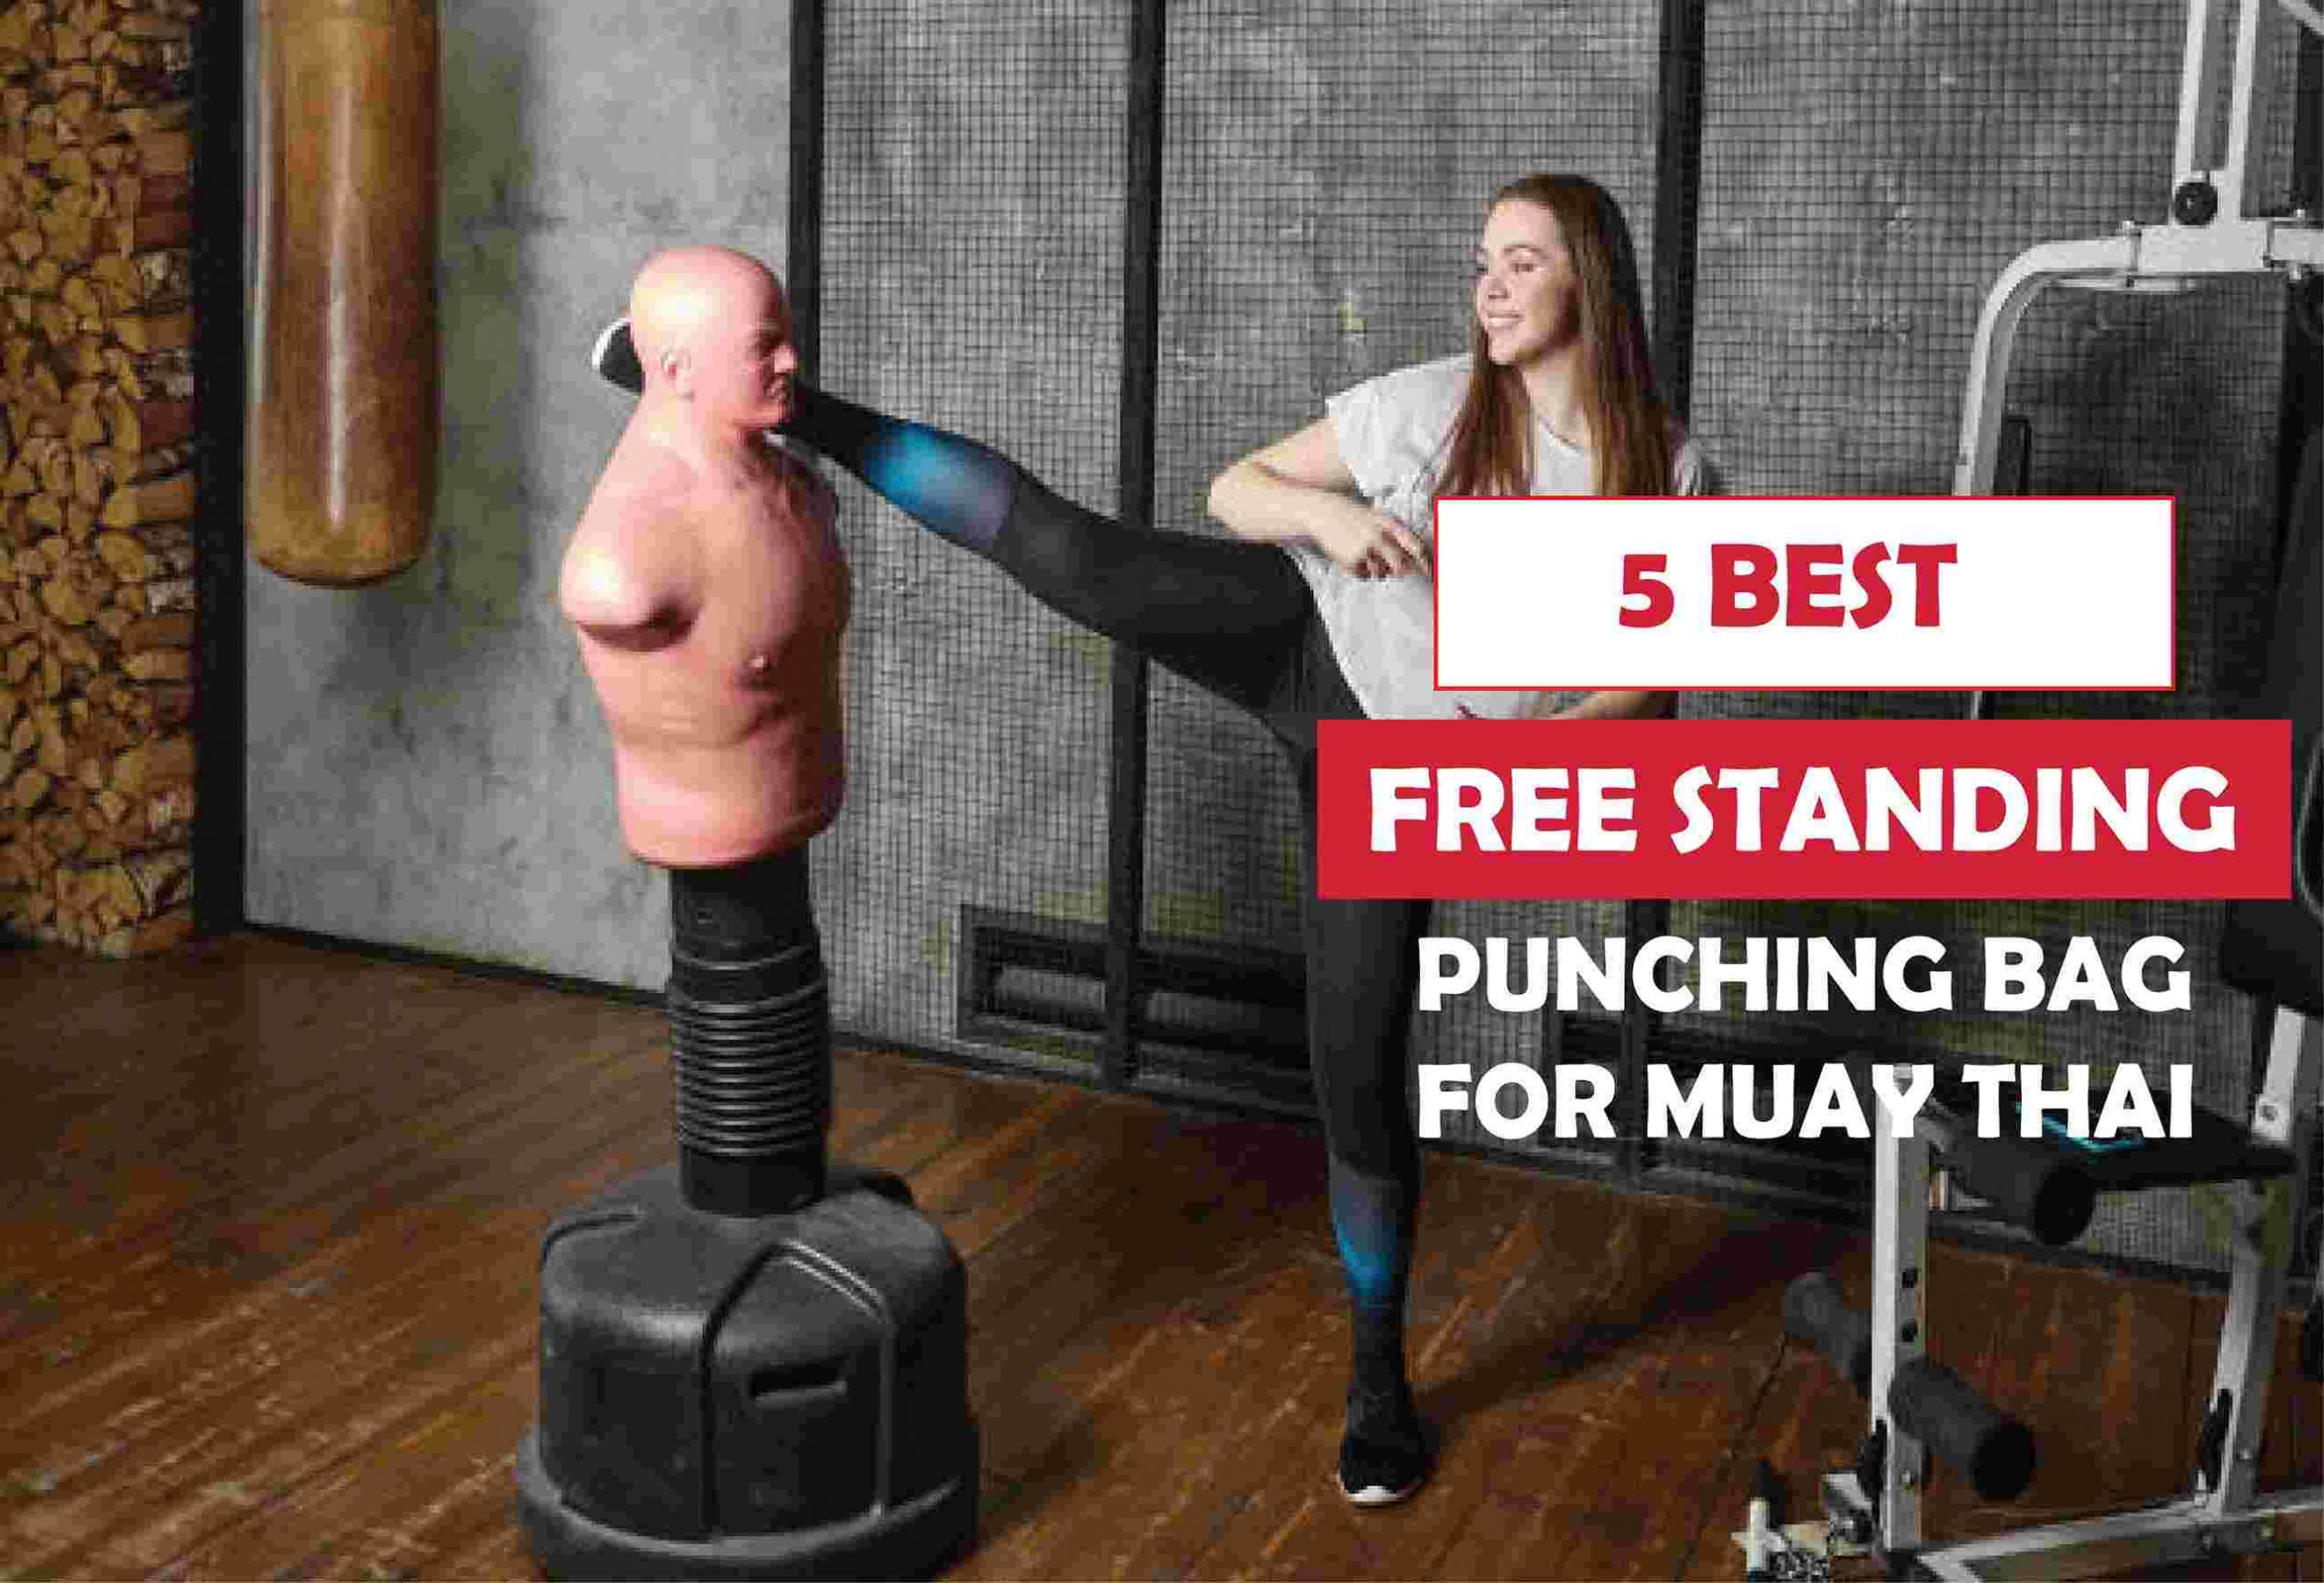 5 Best Free Standing Punching Bag For Muay Thai